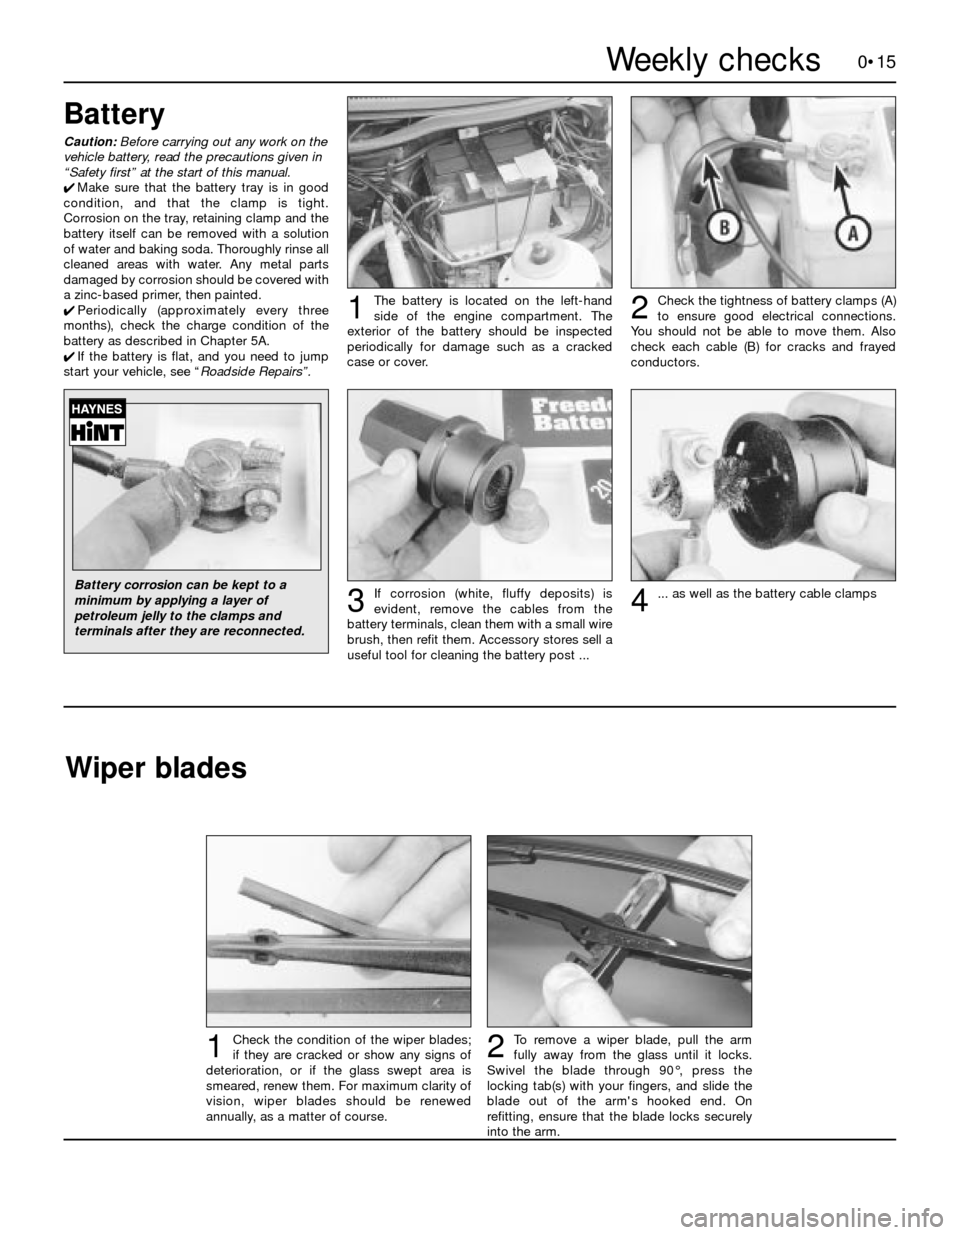 FORD SIERRA 1991 2.G Introduction Workshop Manual 0•15
To remove a wiper blade, pull the arm
fully away from the glass until it locks.
Swivel the blade through 90°, press the
locking tab(s) with your fingers, and slide the
blade out of the arms h